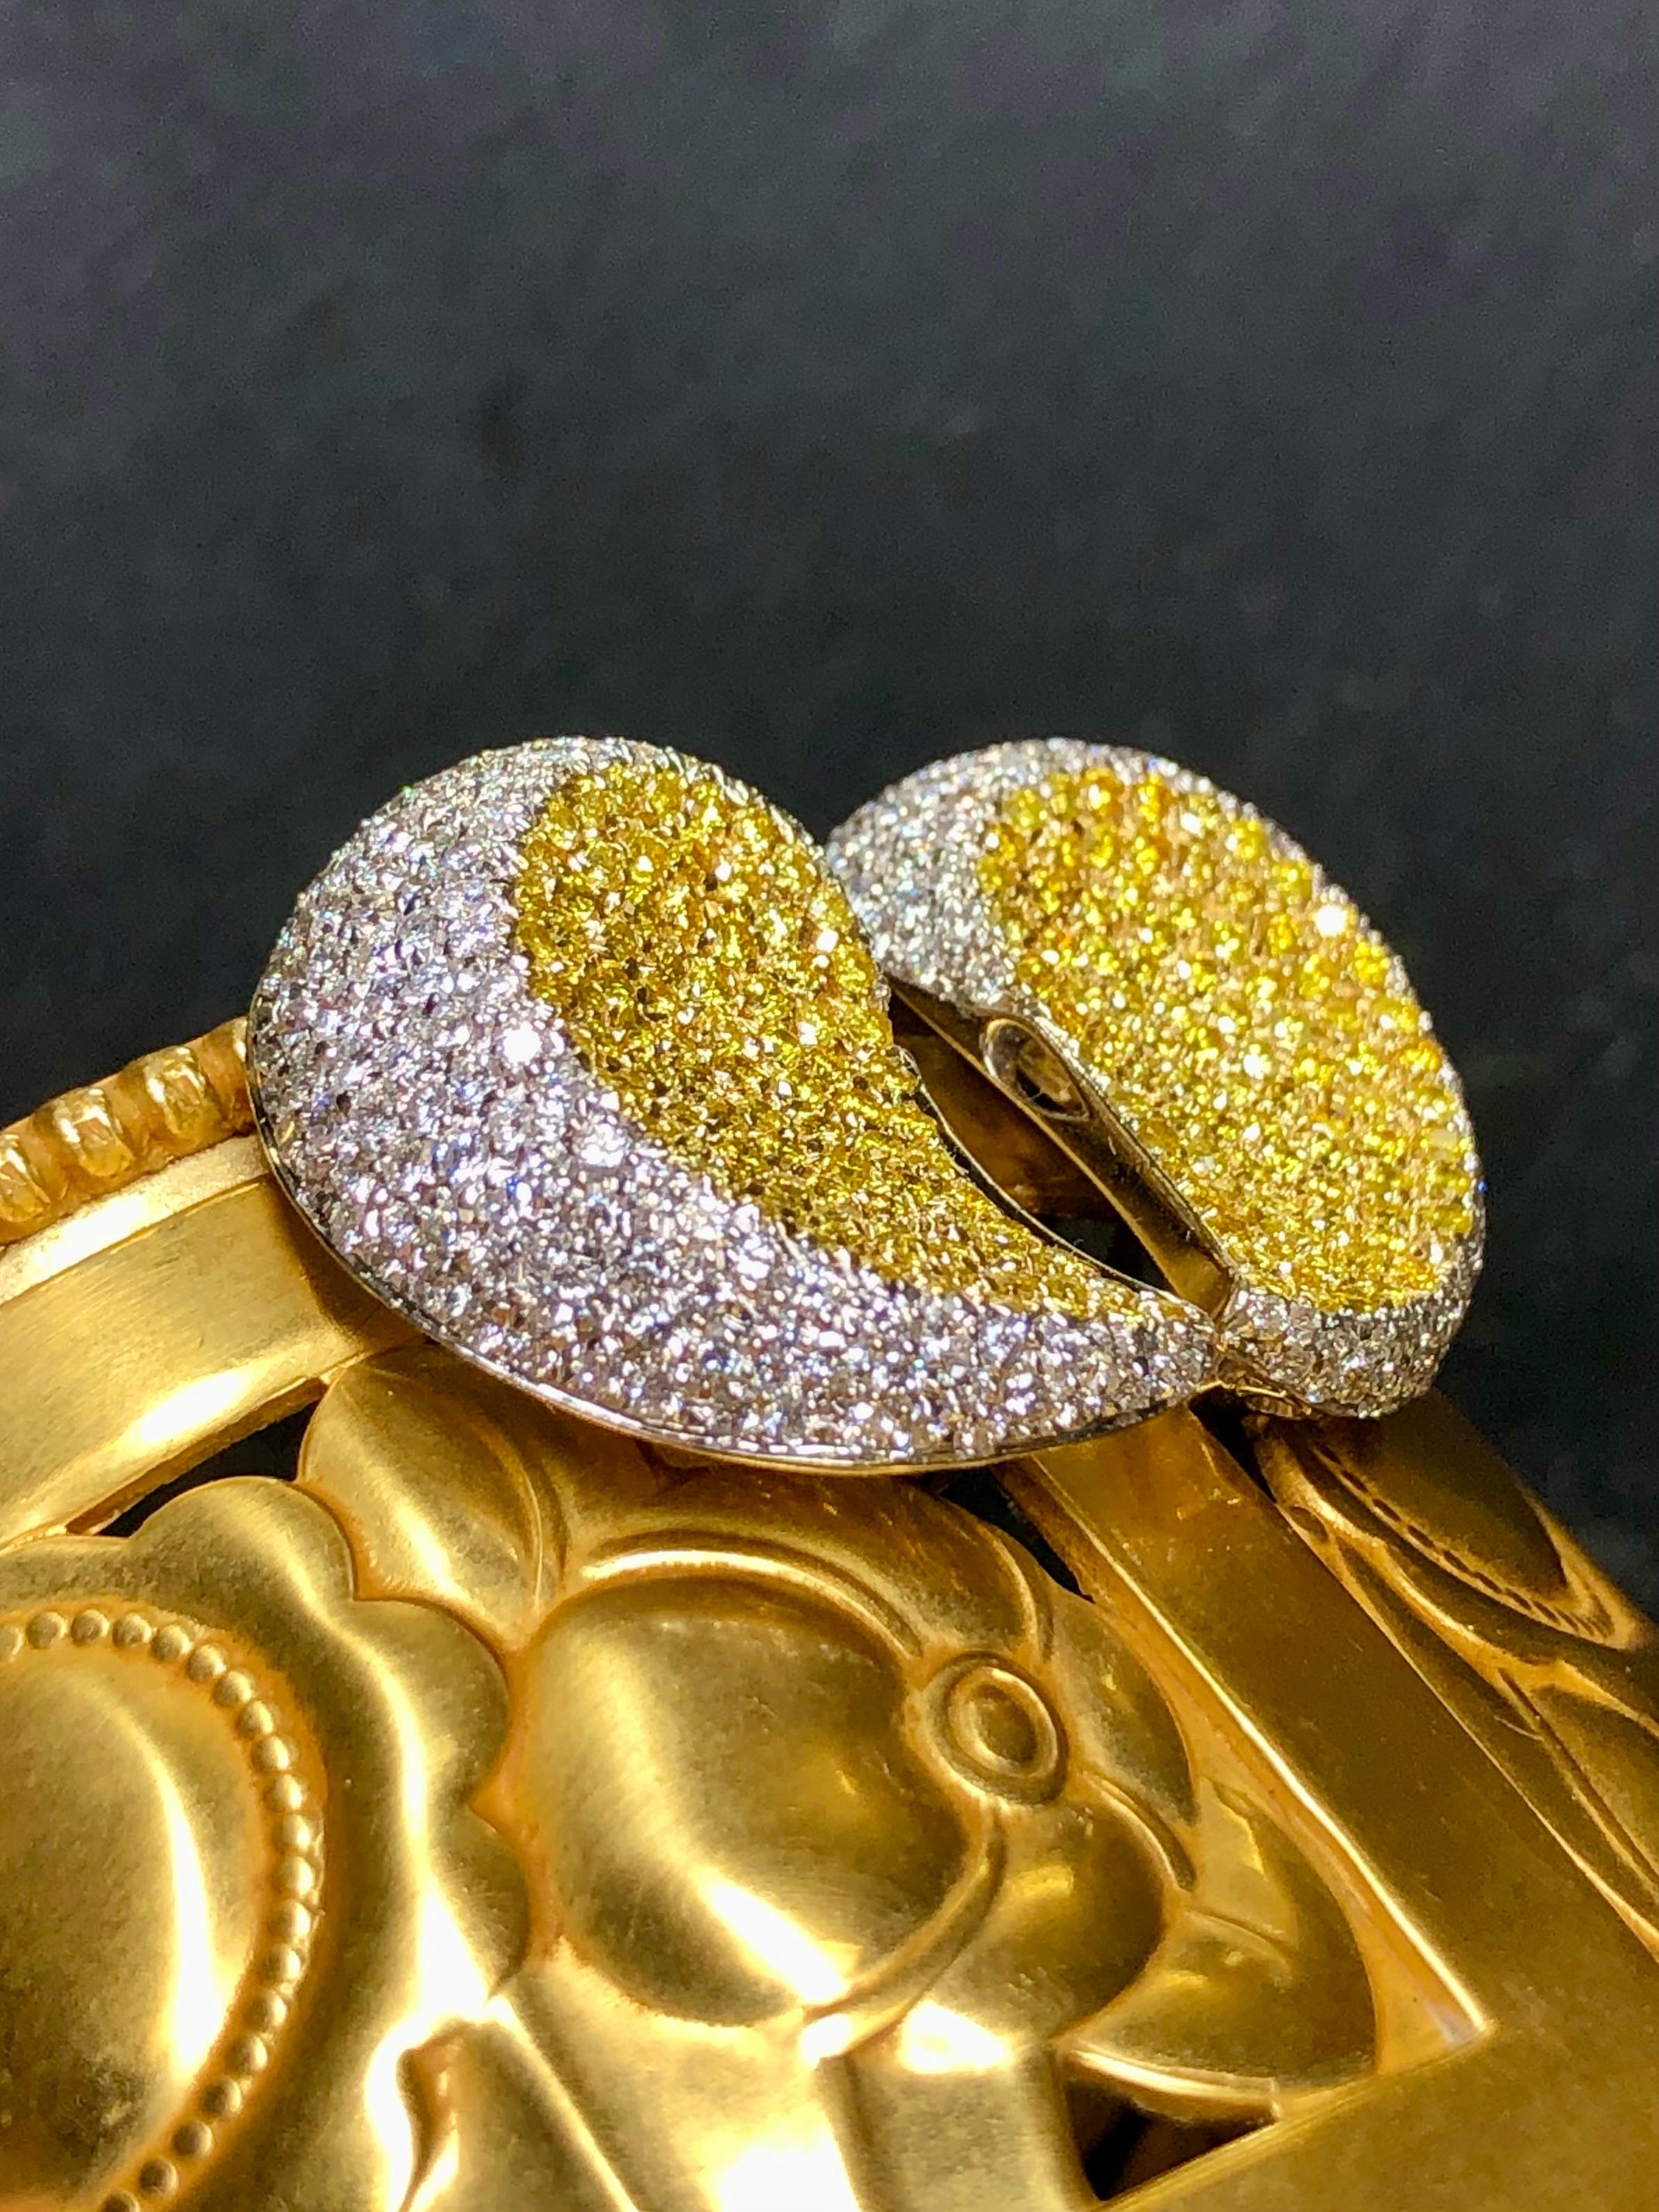 CANTAMESSA 18K Pave White Fancy Yellow Diamond Paisley Huggies Earrings 6.60ctw In Good Condition For Sale In Winter Springs, FL